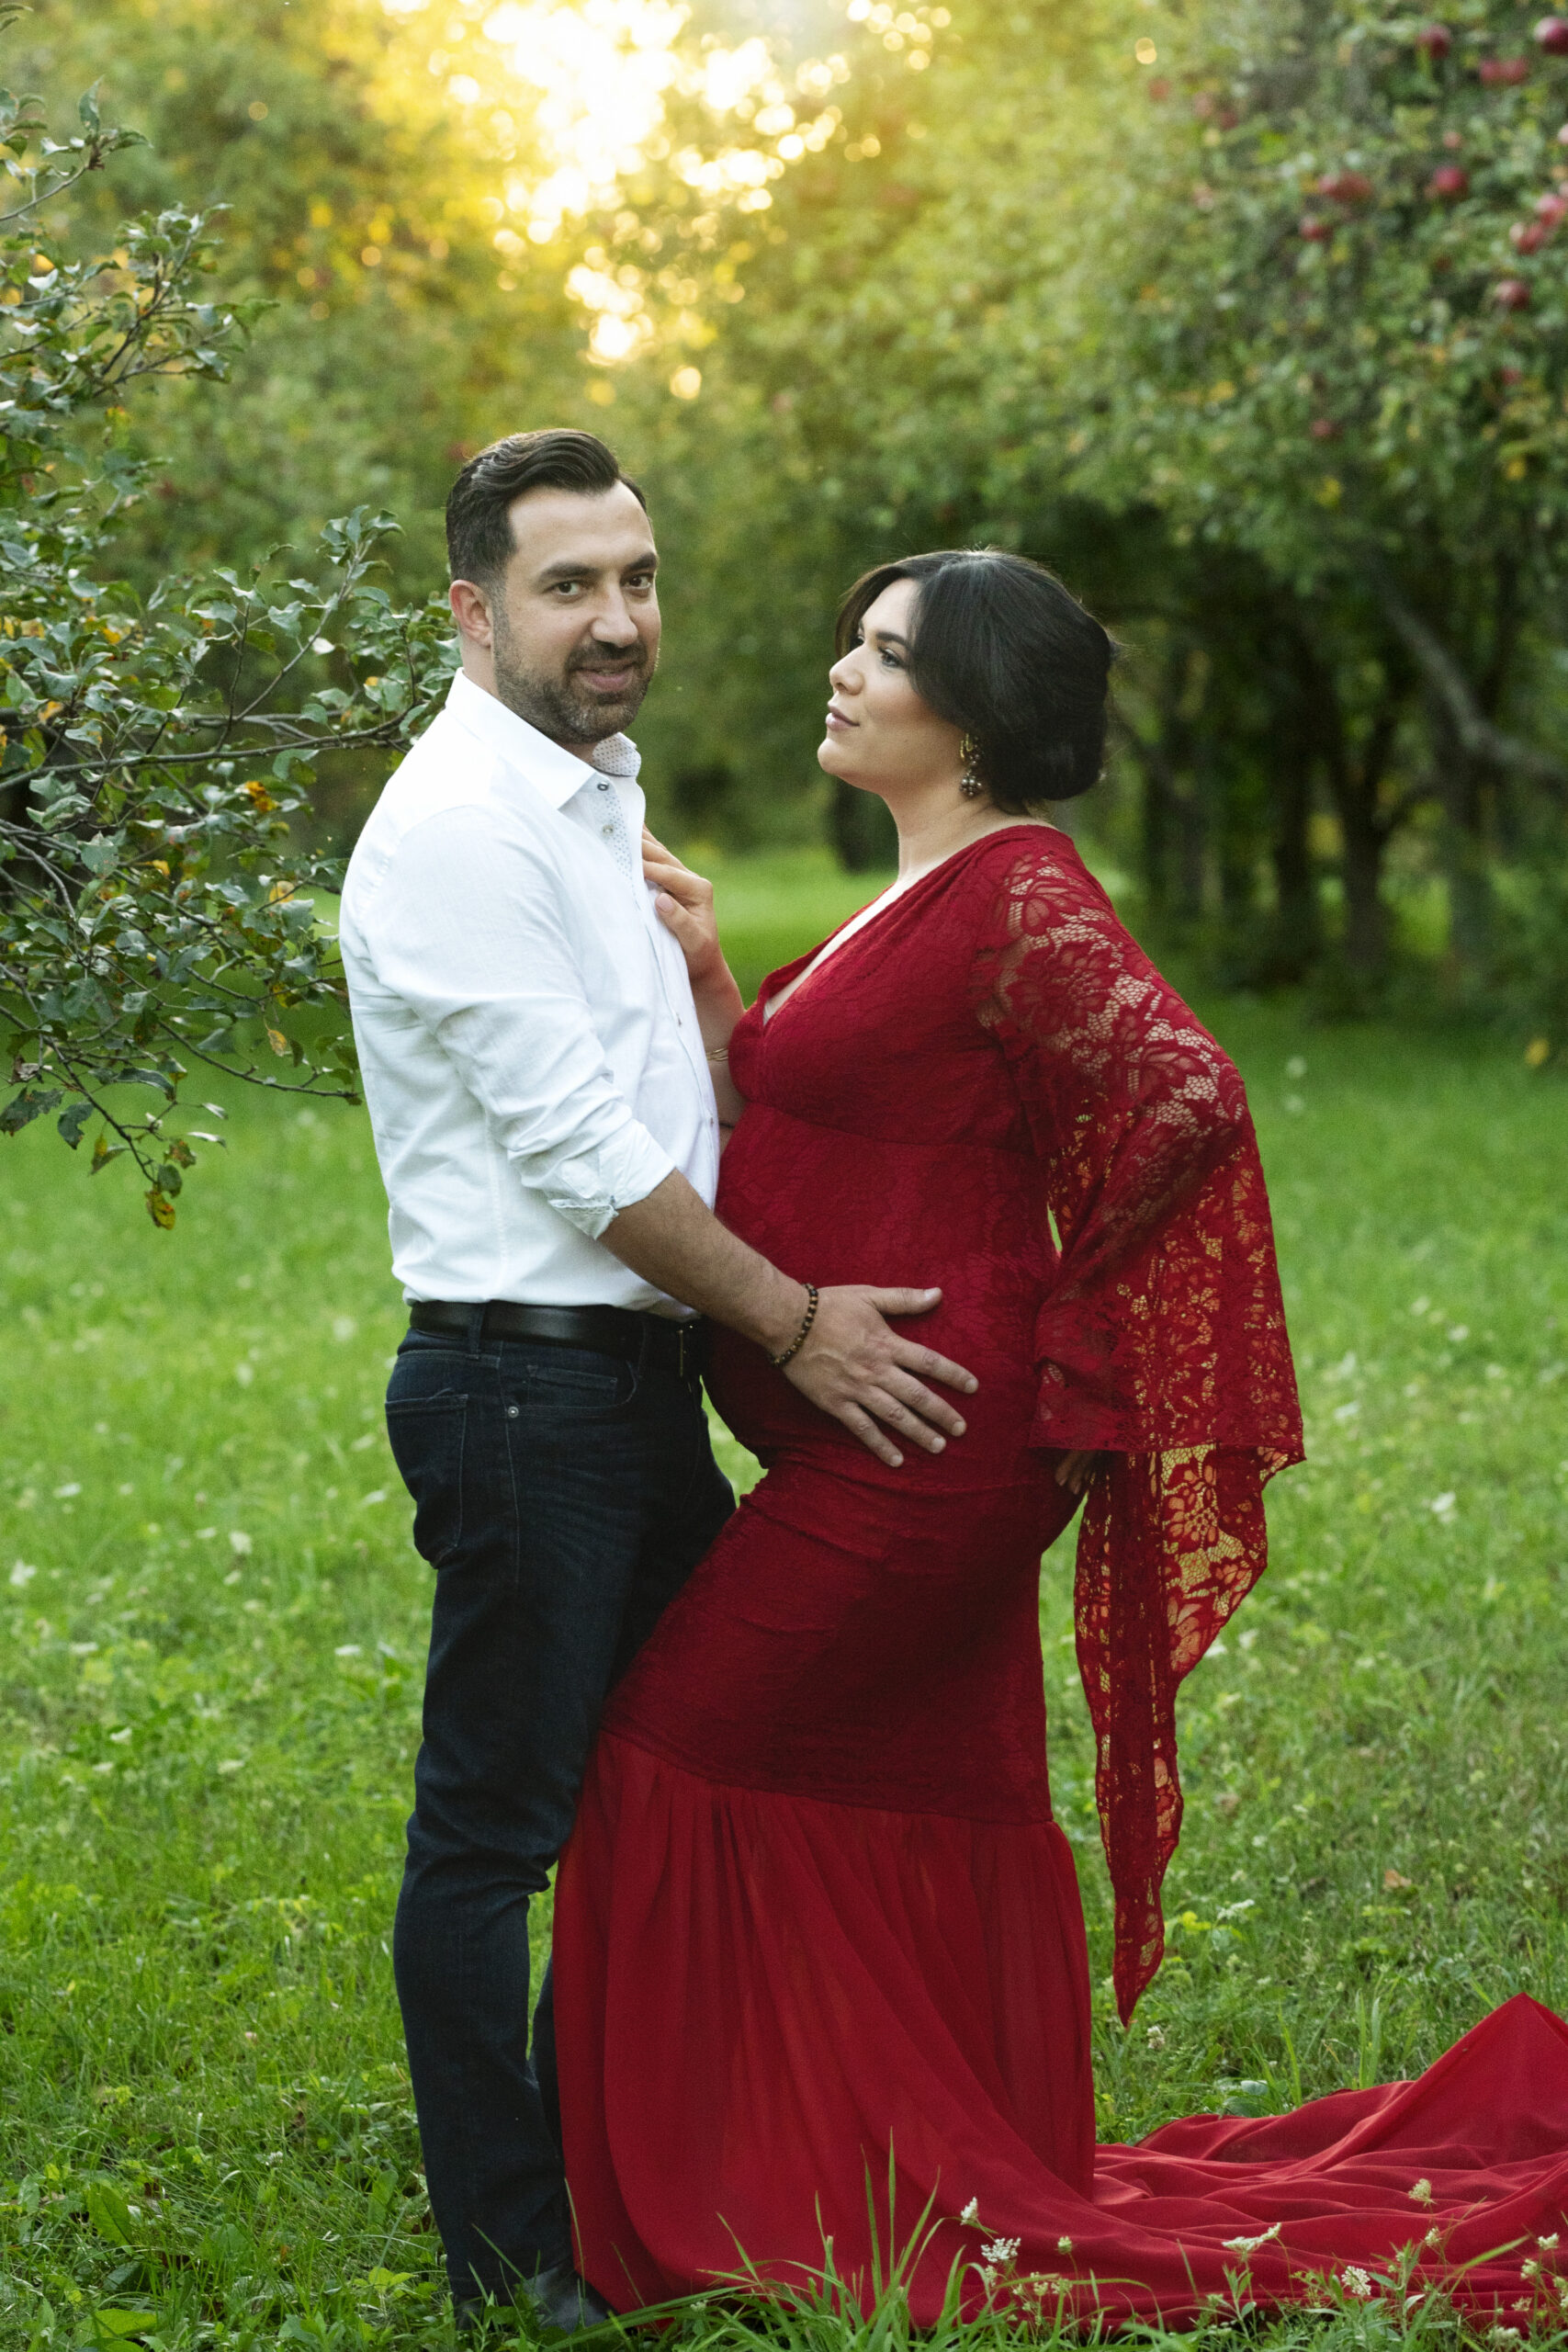 Grand rapids maternity photo session wife in red dress with husband in white shirt